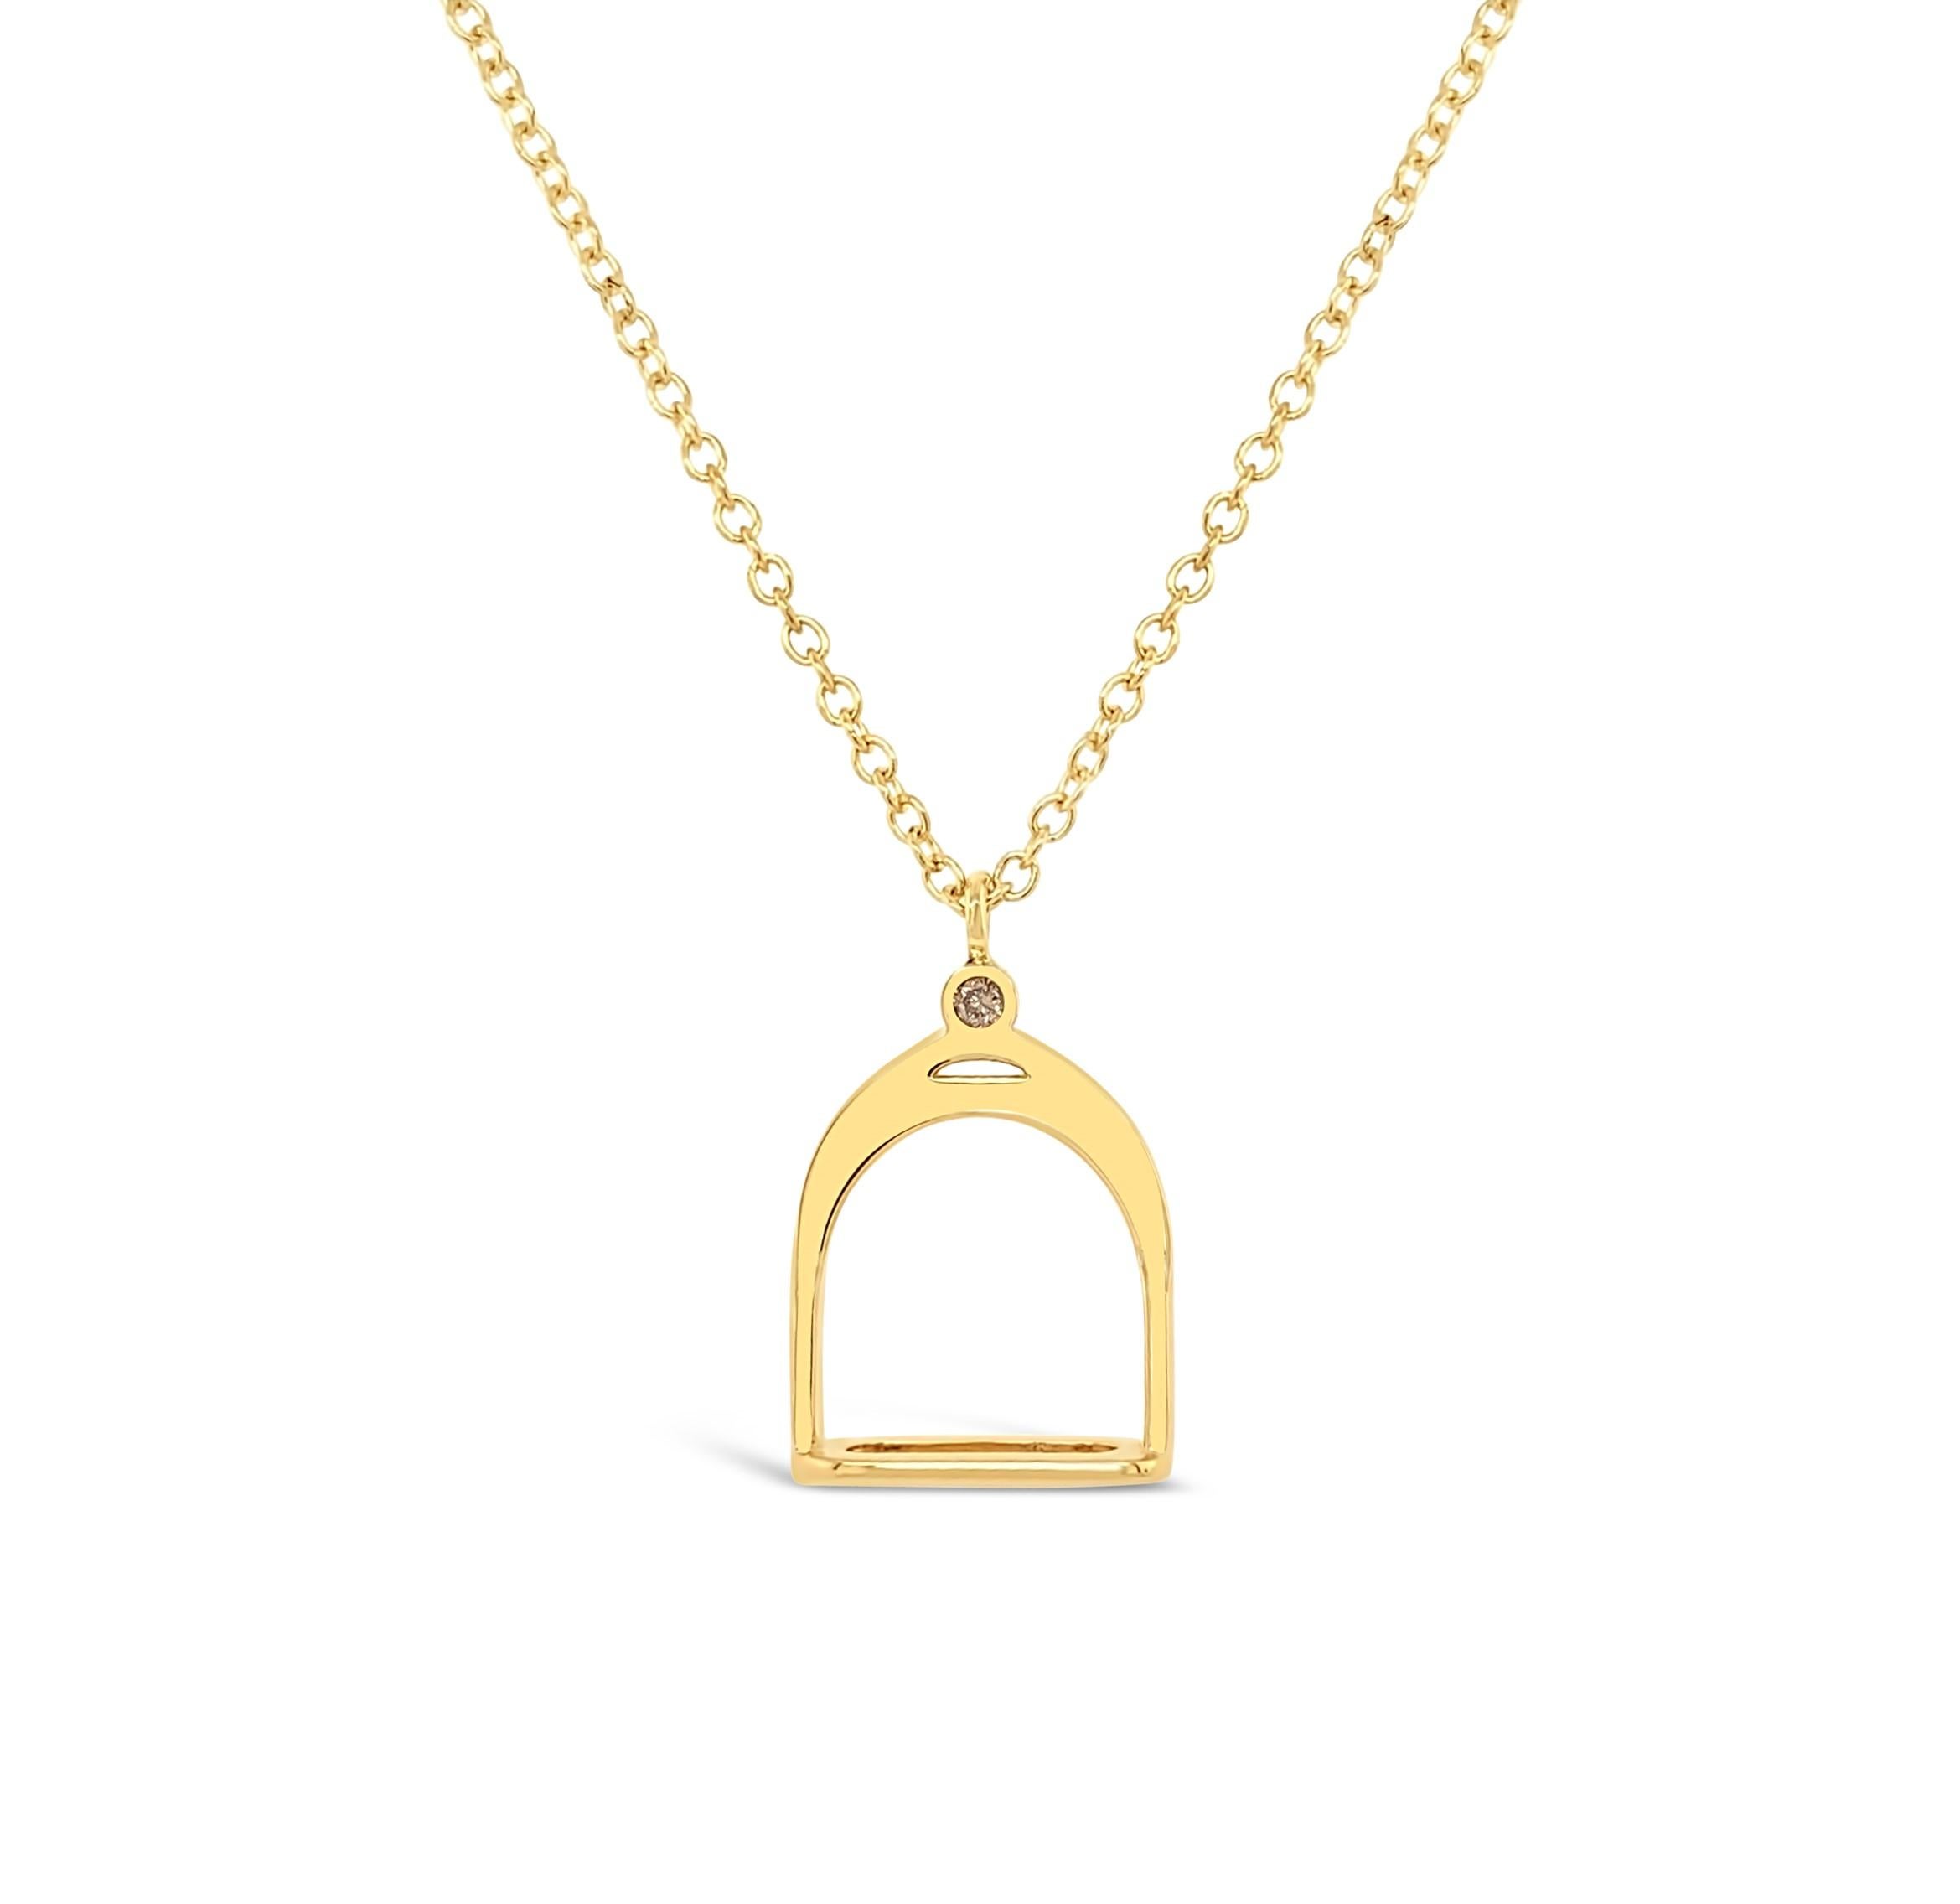 Round Cut Garavelli 18Kt Yellow Gold Diamonds Stirrups Collection Pendant Necklace For Sale